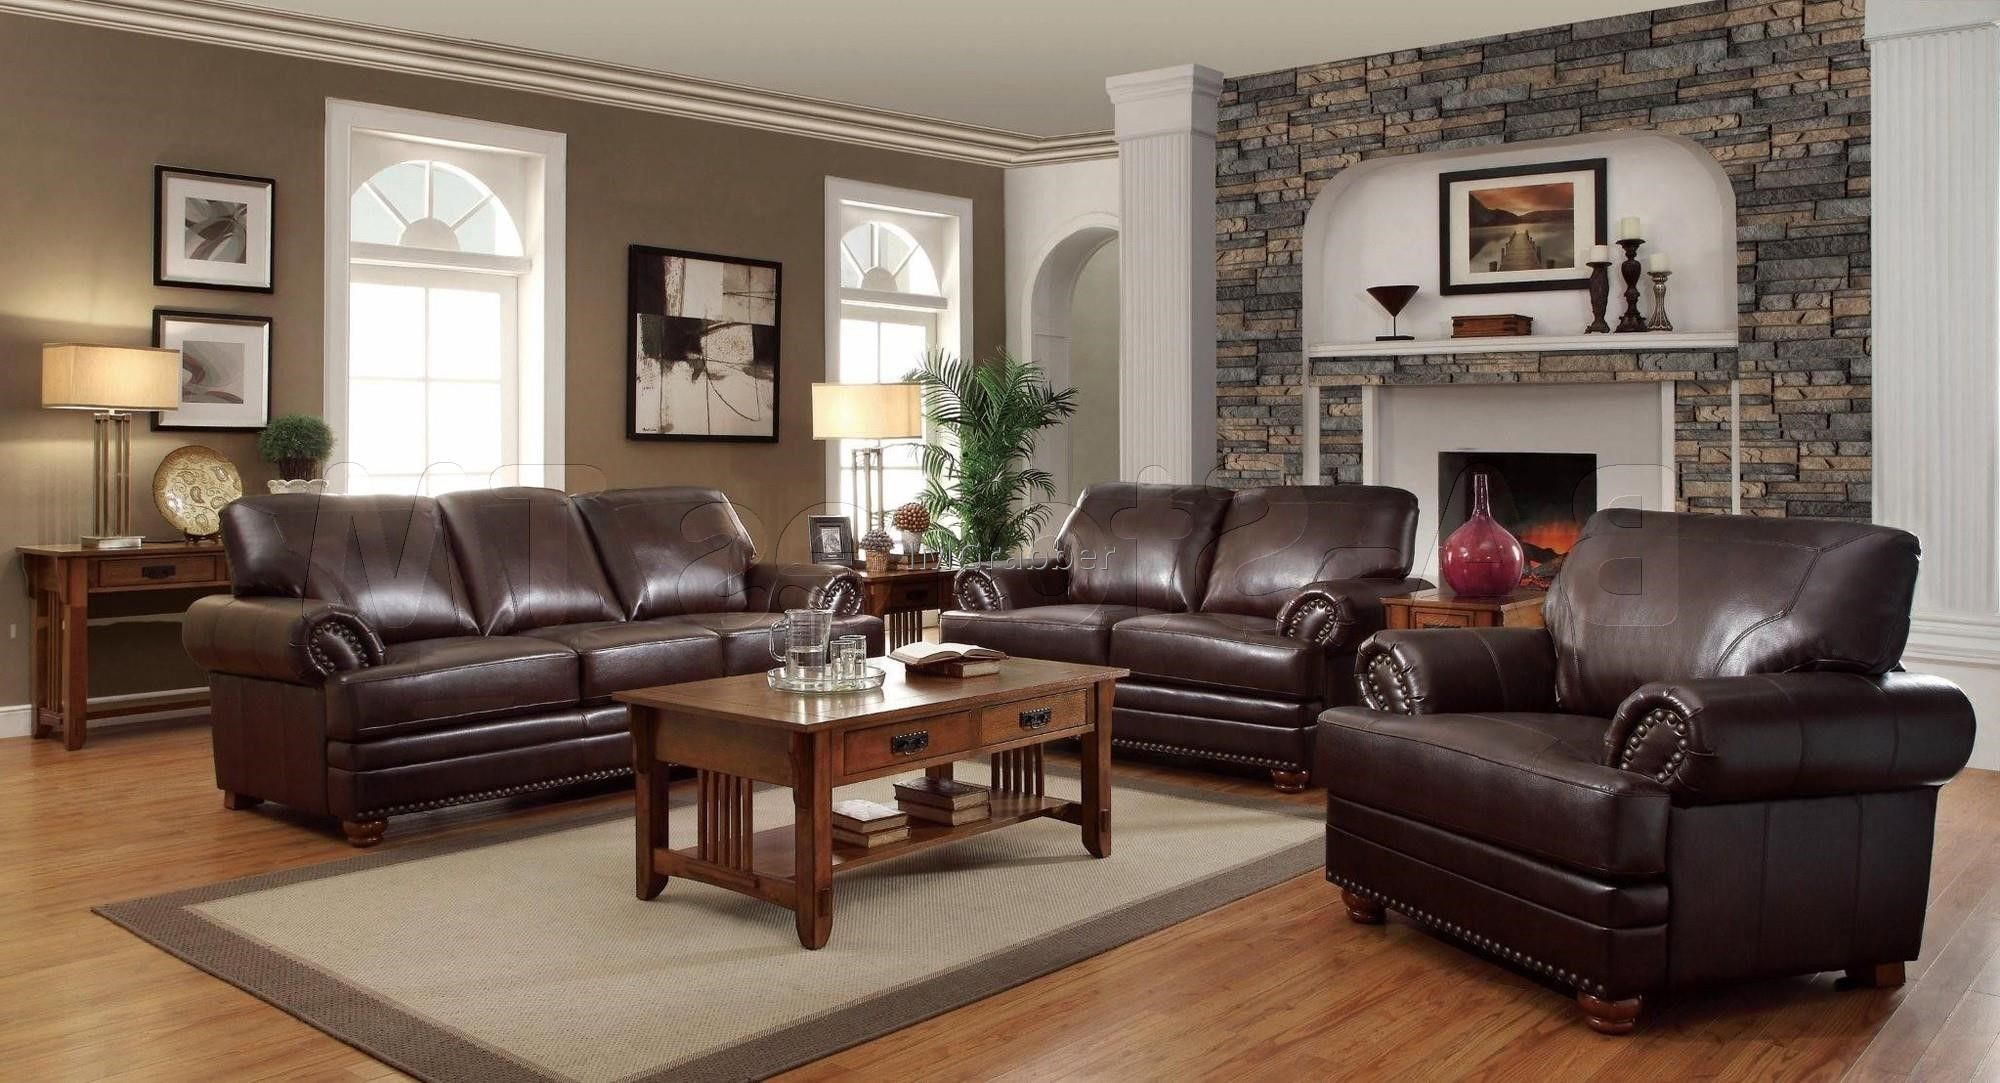 living room decor ideas with brown couches